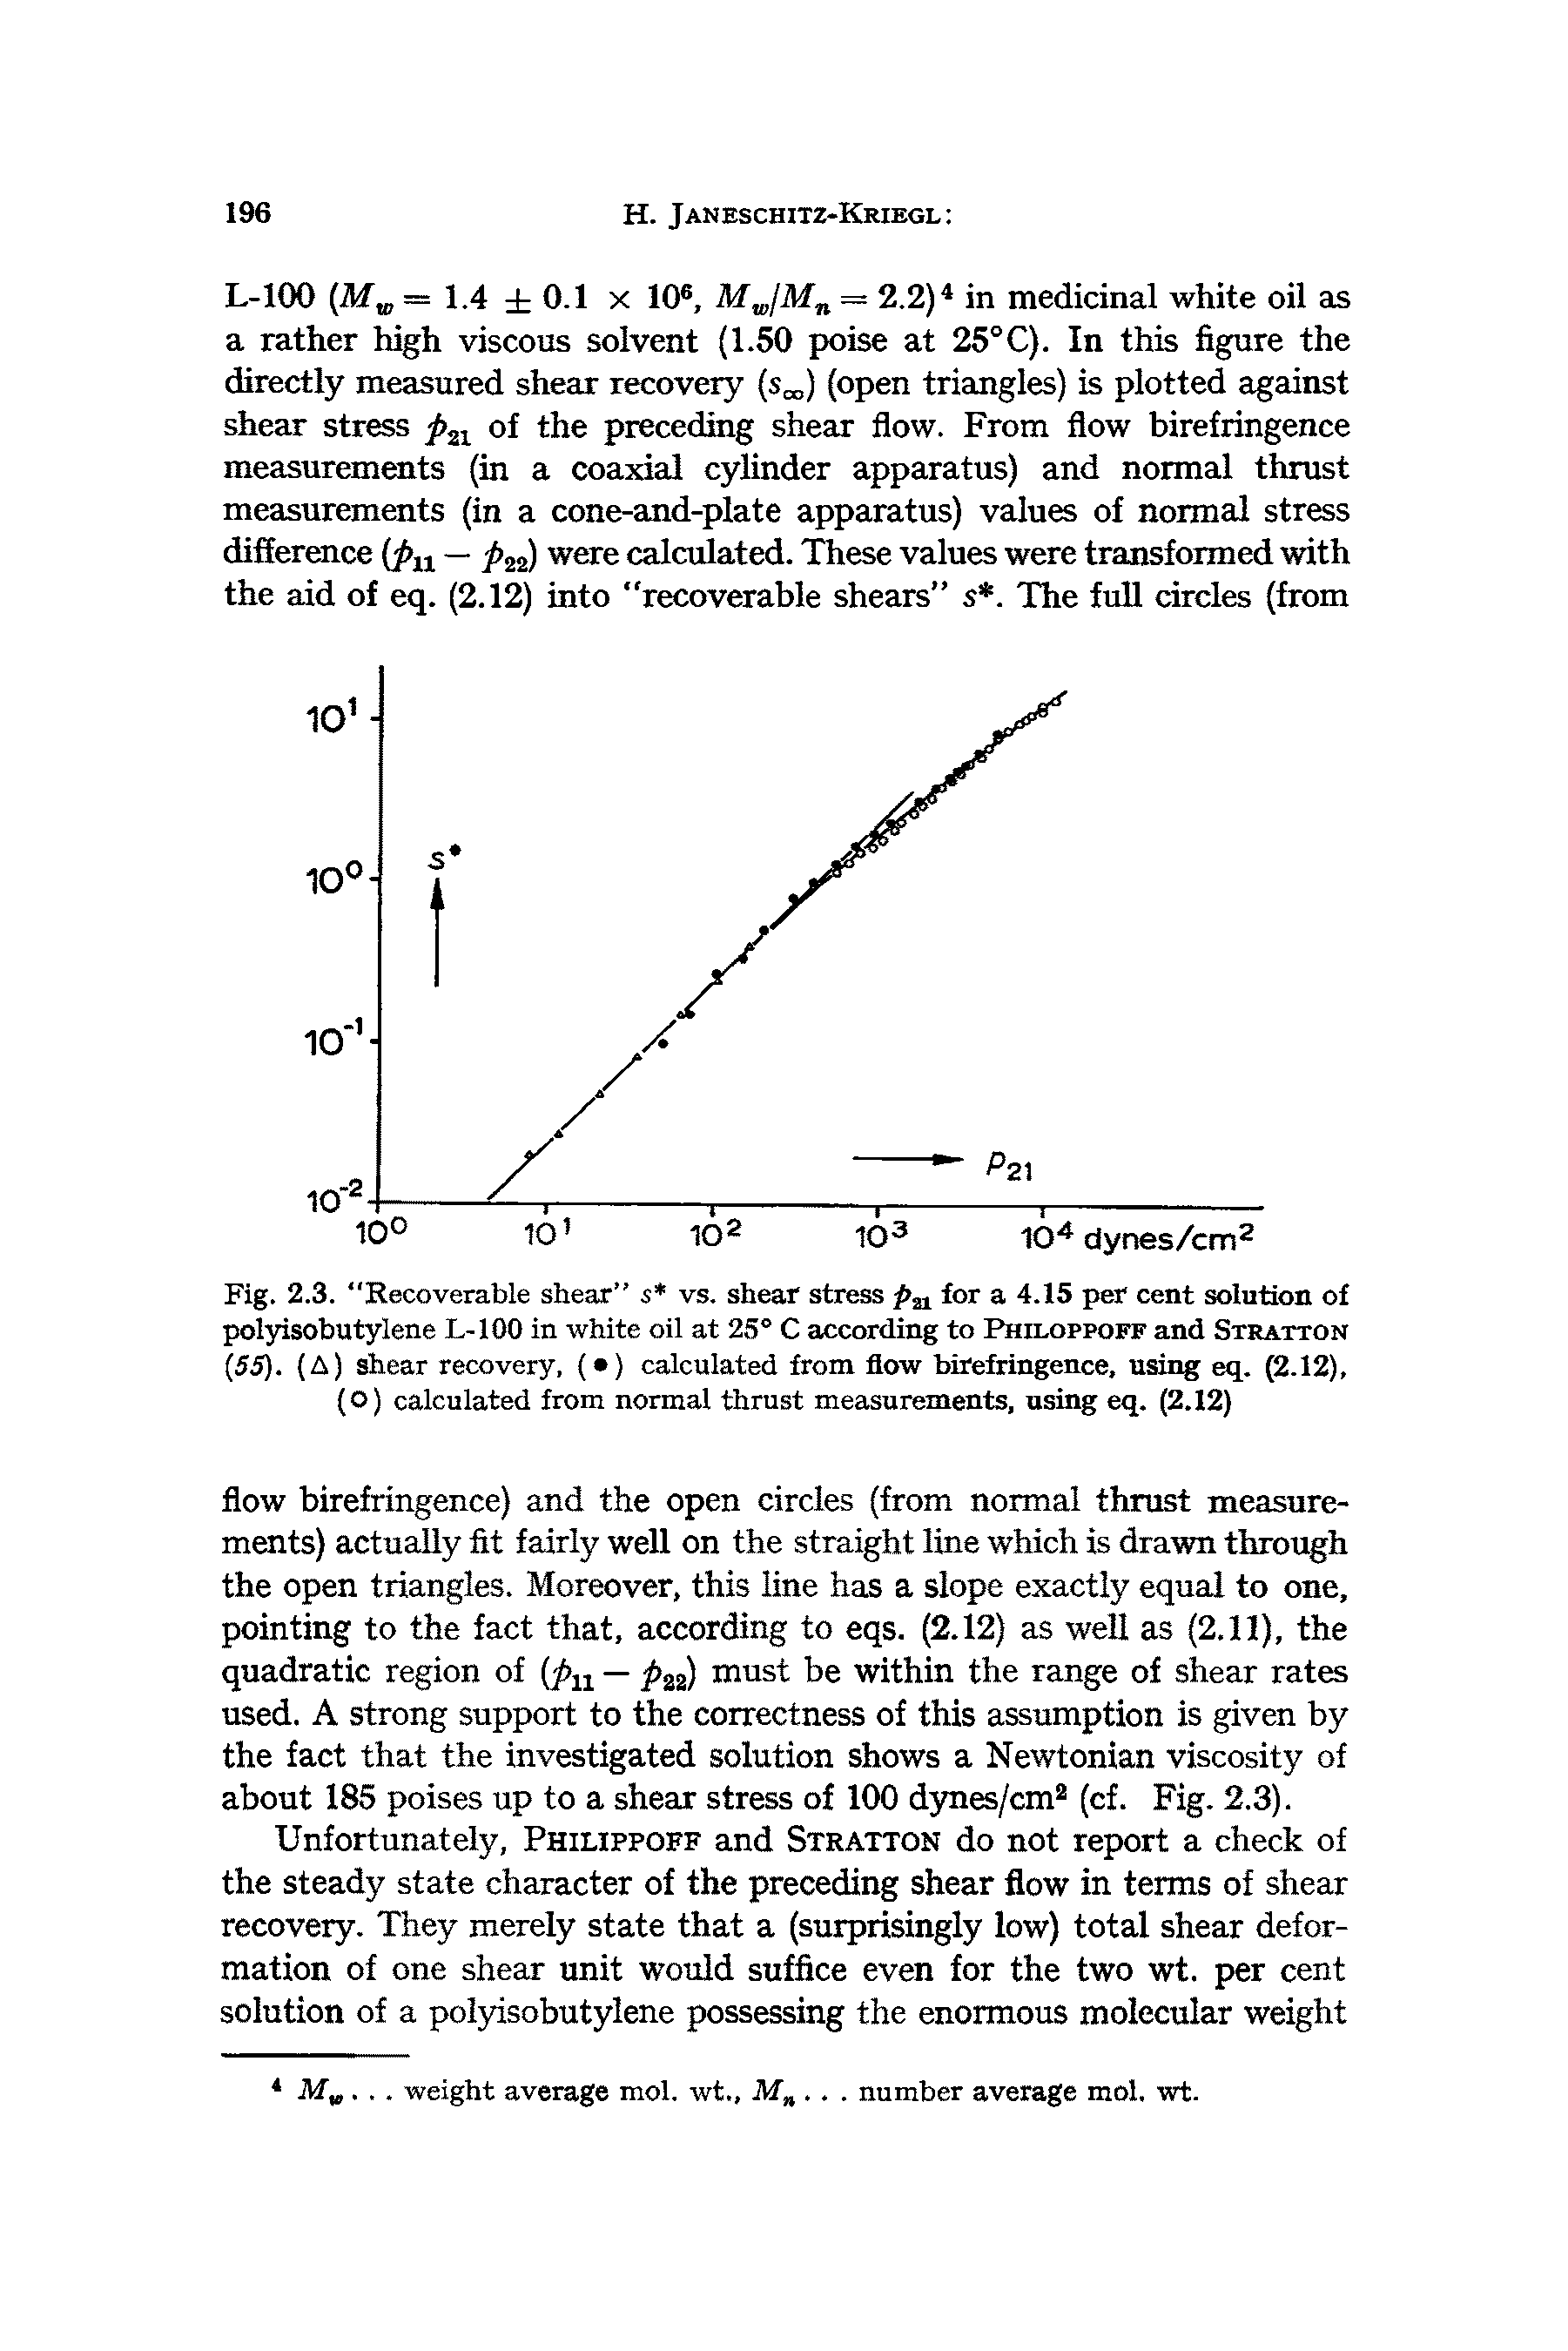 Fig. 2.3. "Recoverable shear" 5 vs. shear stress p21 for a 4.15 per cent solution of polyisobutylene L-100 in white oil at 25° C according to Philoppoff and Stratton (55). (A) shear recovery, ( ) calculated from flow birefringence, using eq. (2.12), (O) calculated from normal thrust measurements, using eq. (2.12)...